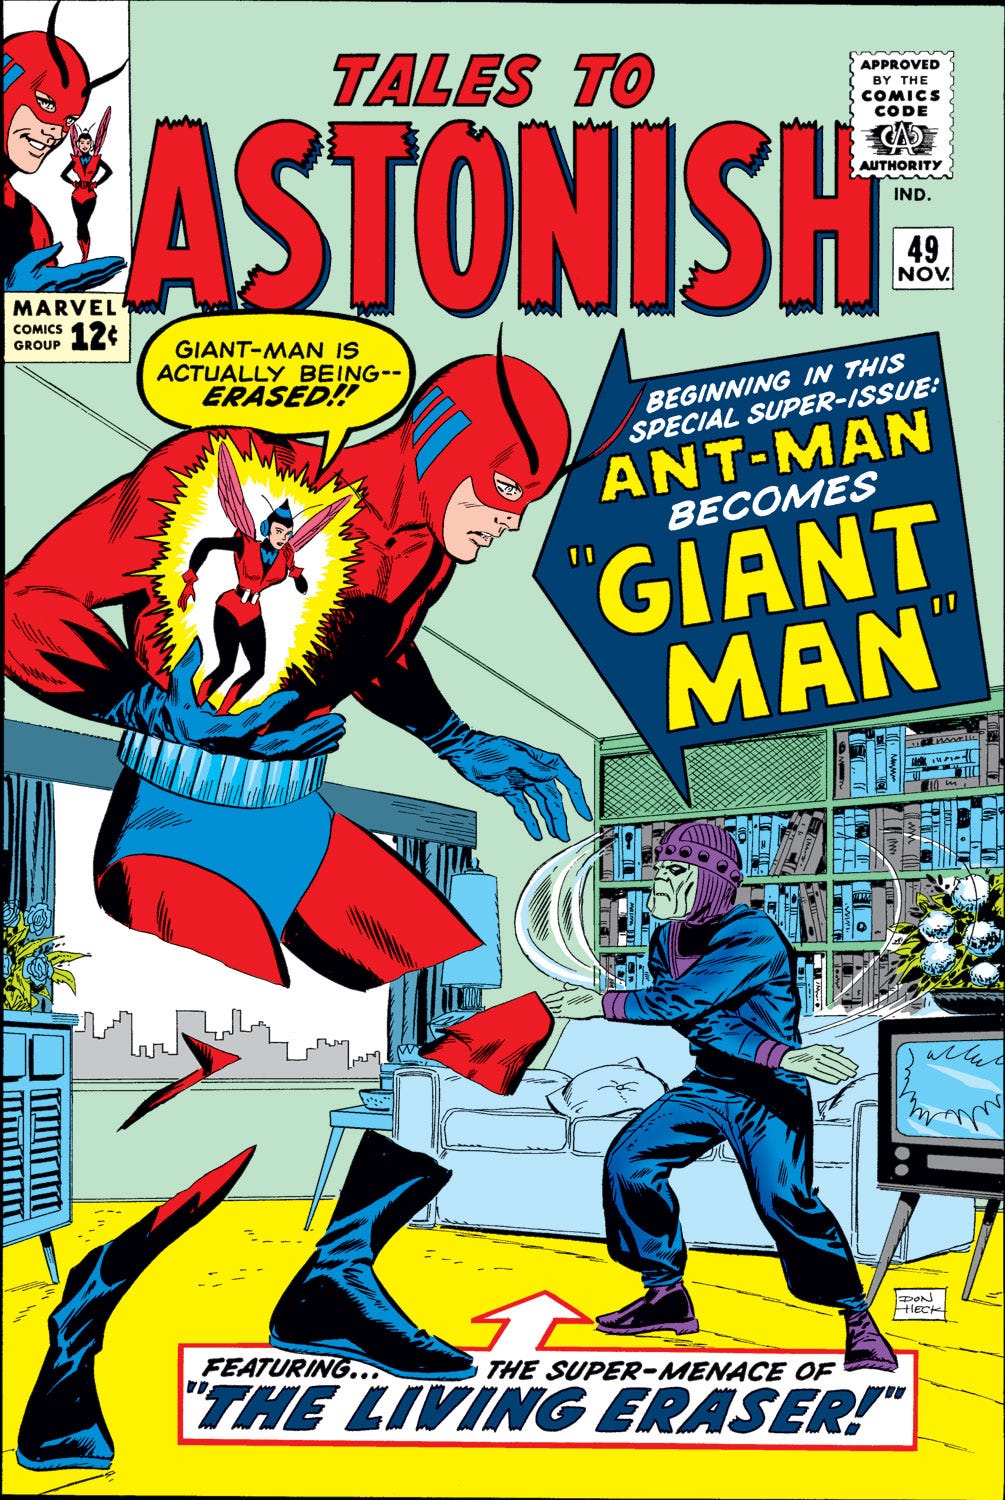 Episode 86: Atomic Power - Humanity’s Only Hope? (Tales to Astonish #49) -- November 1963